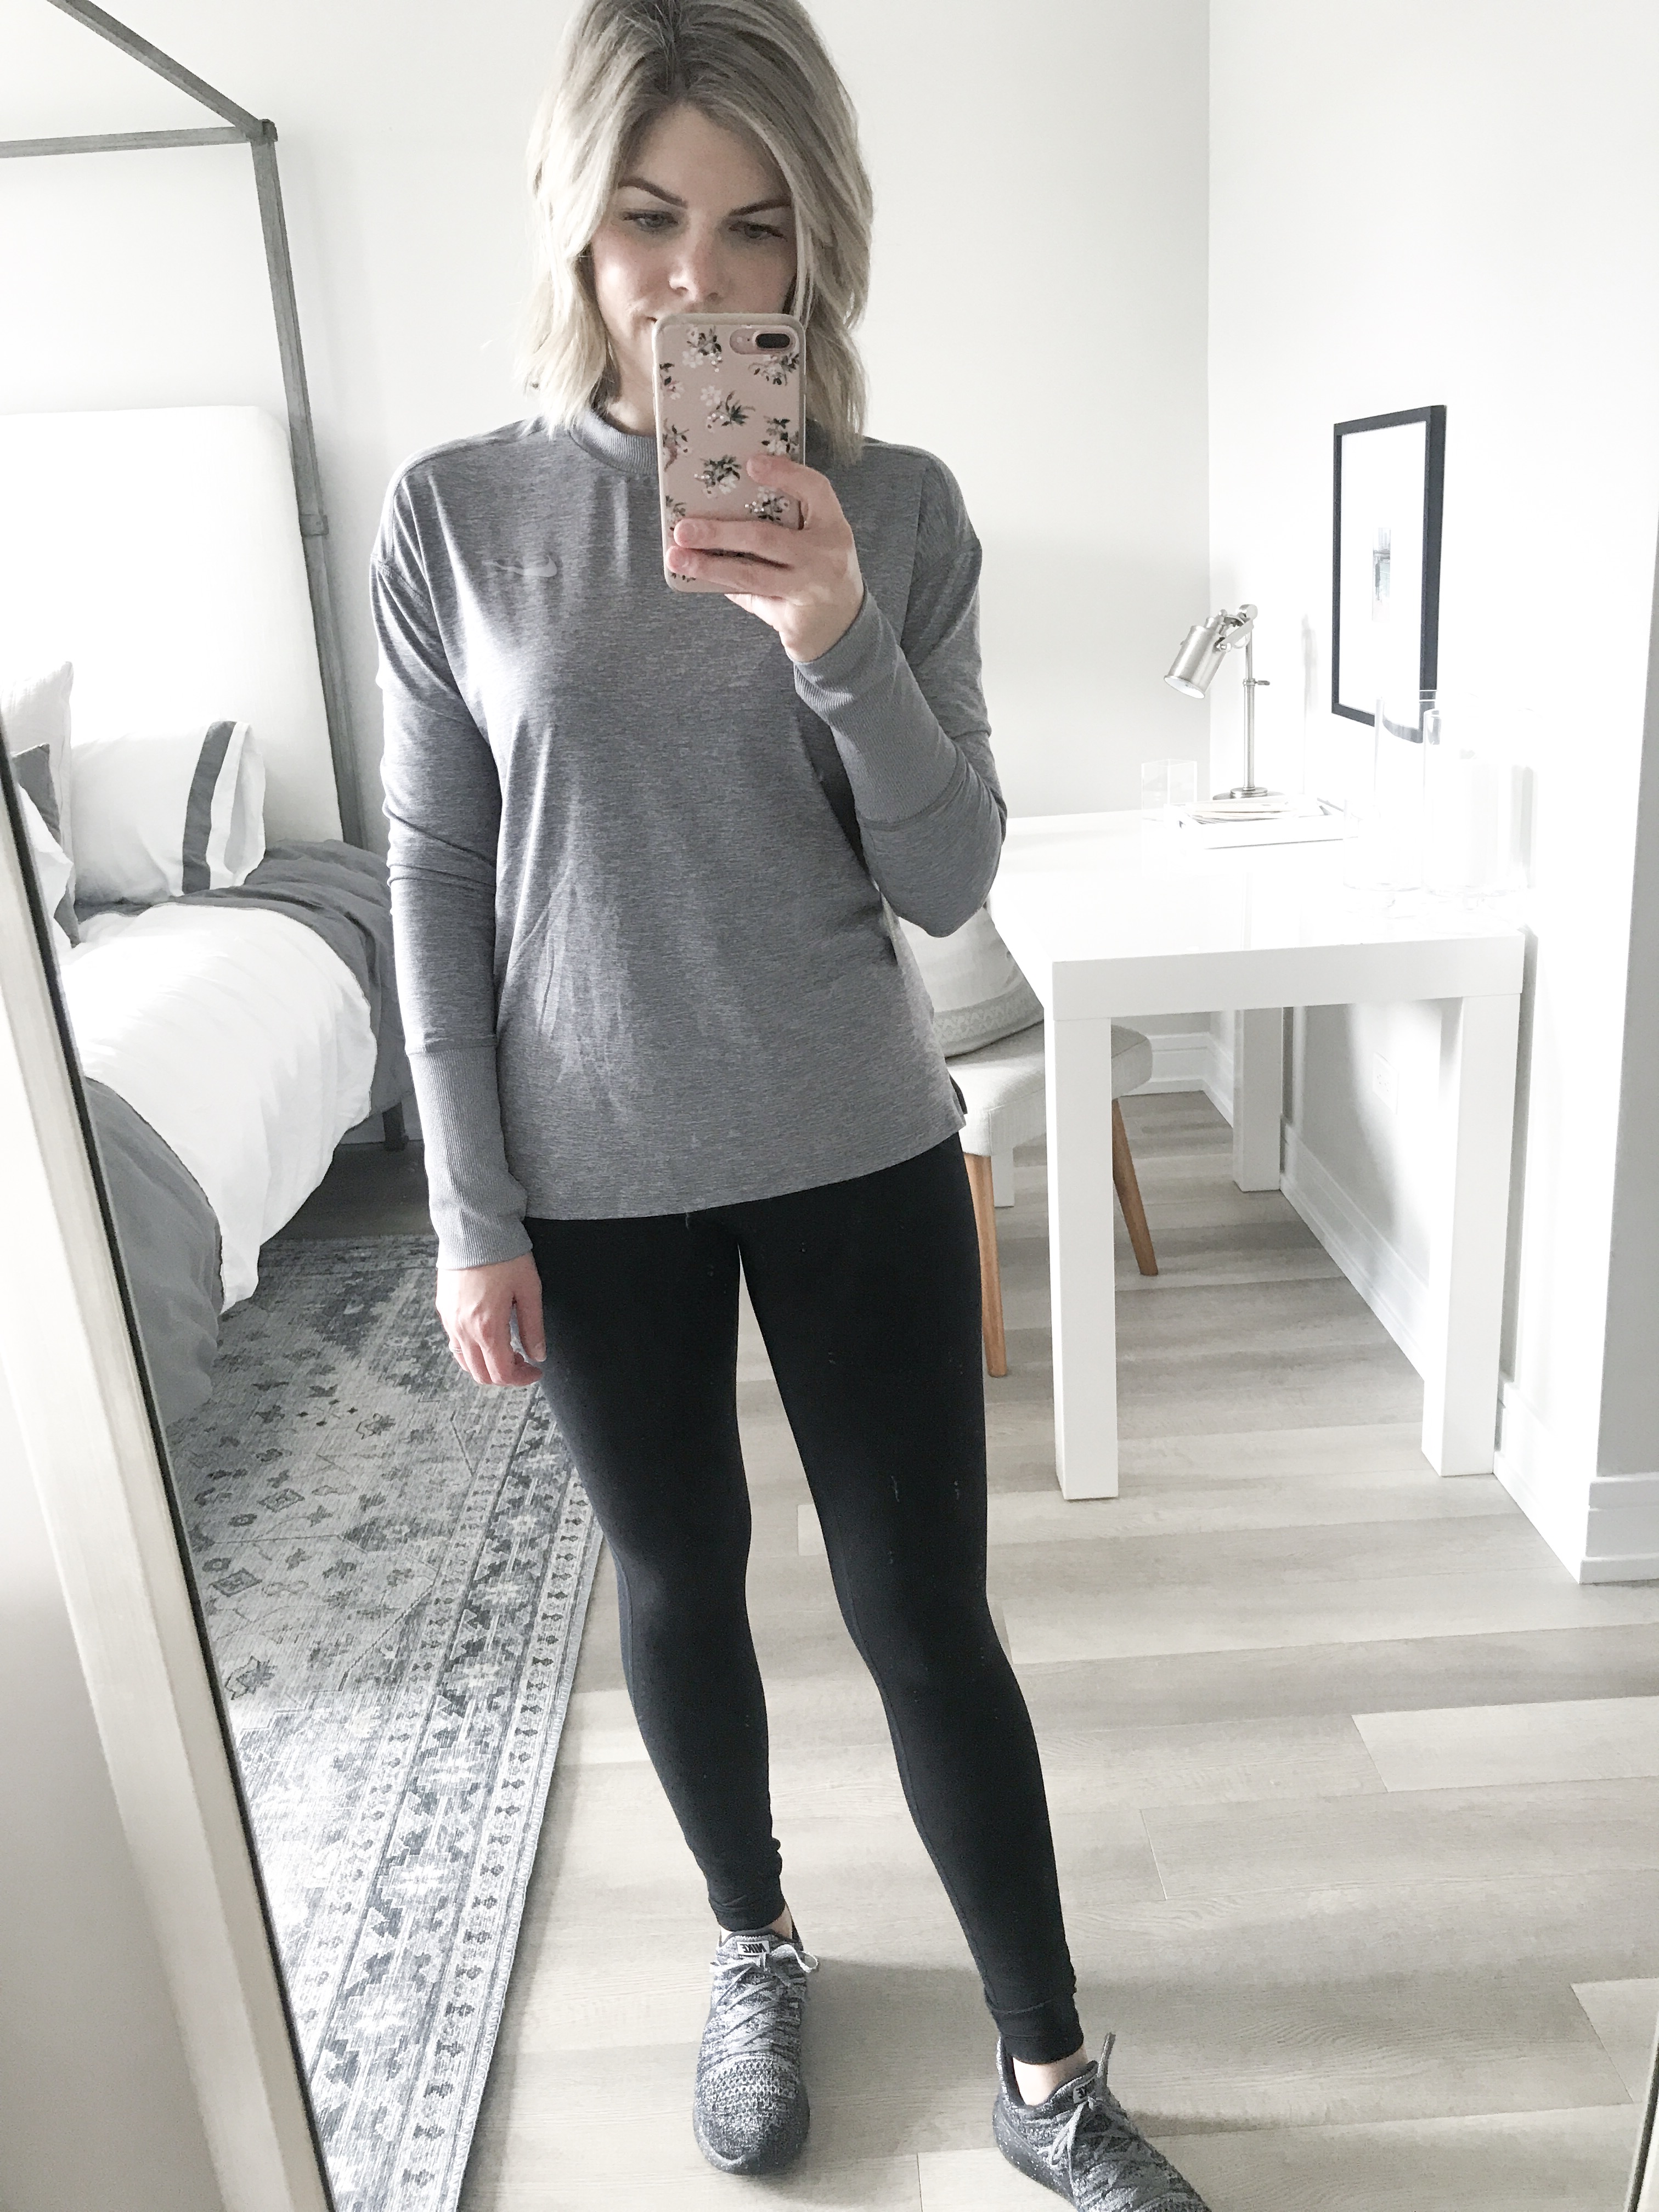 Nike activewear outfit